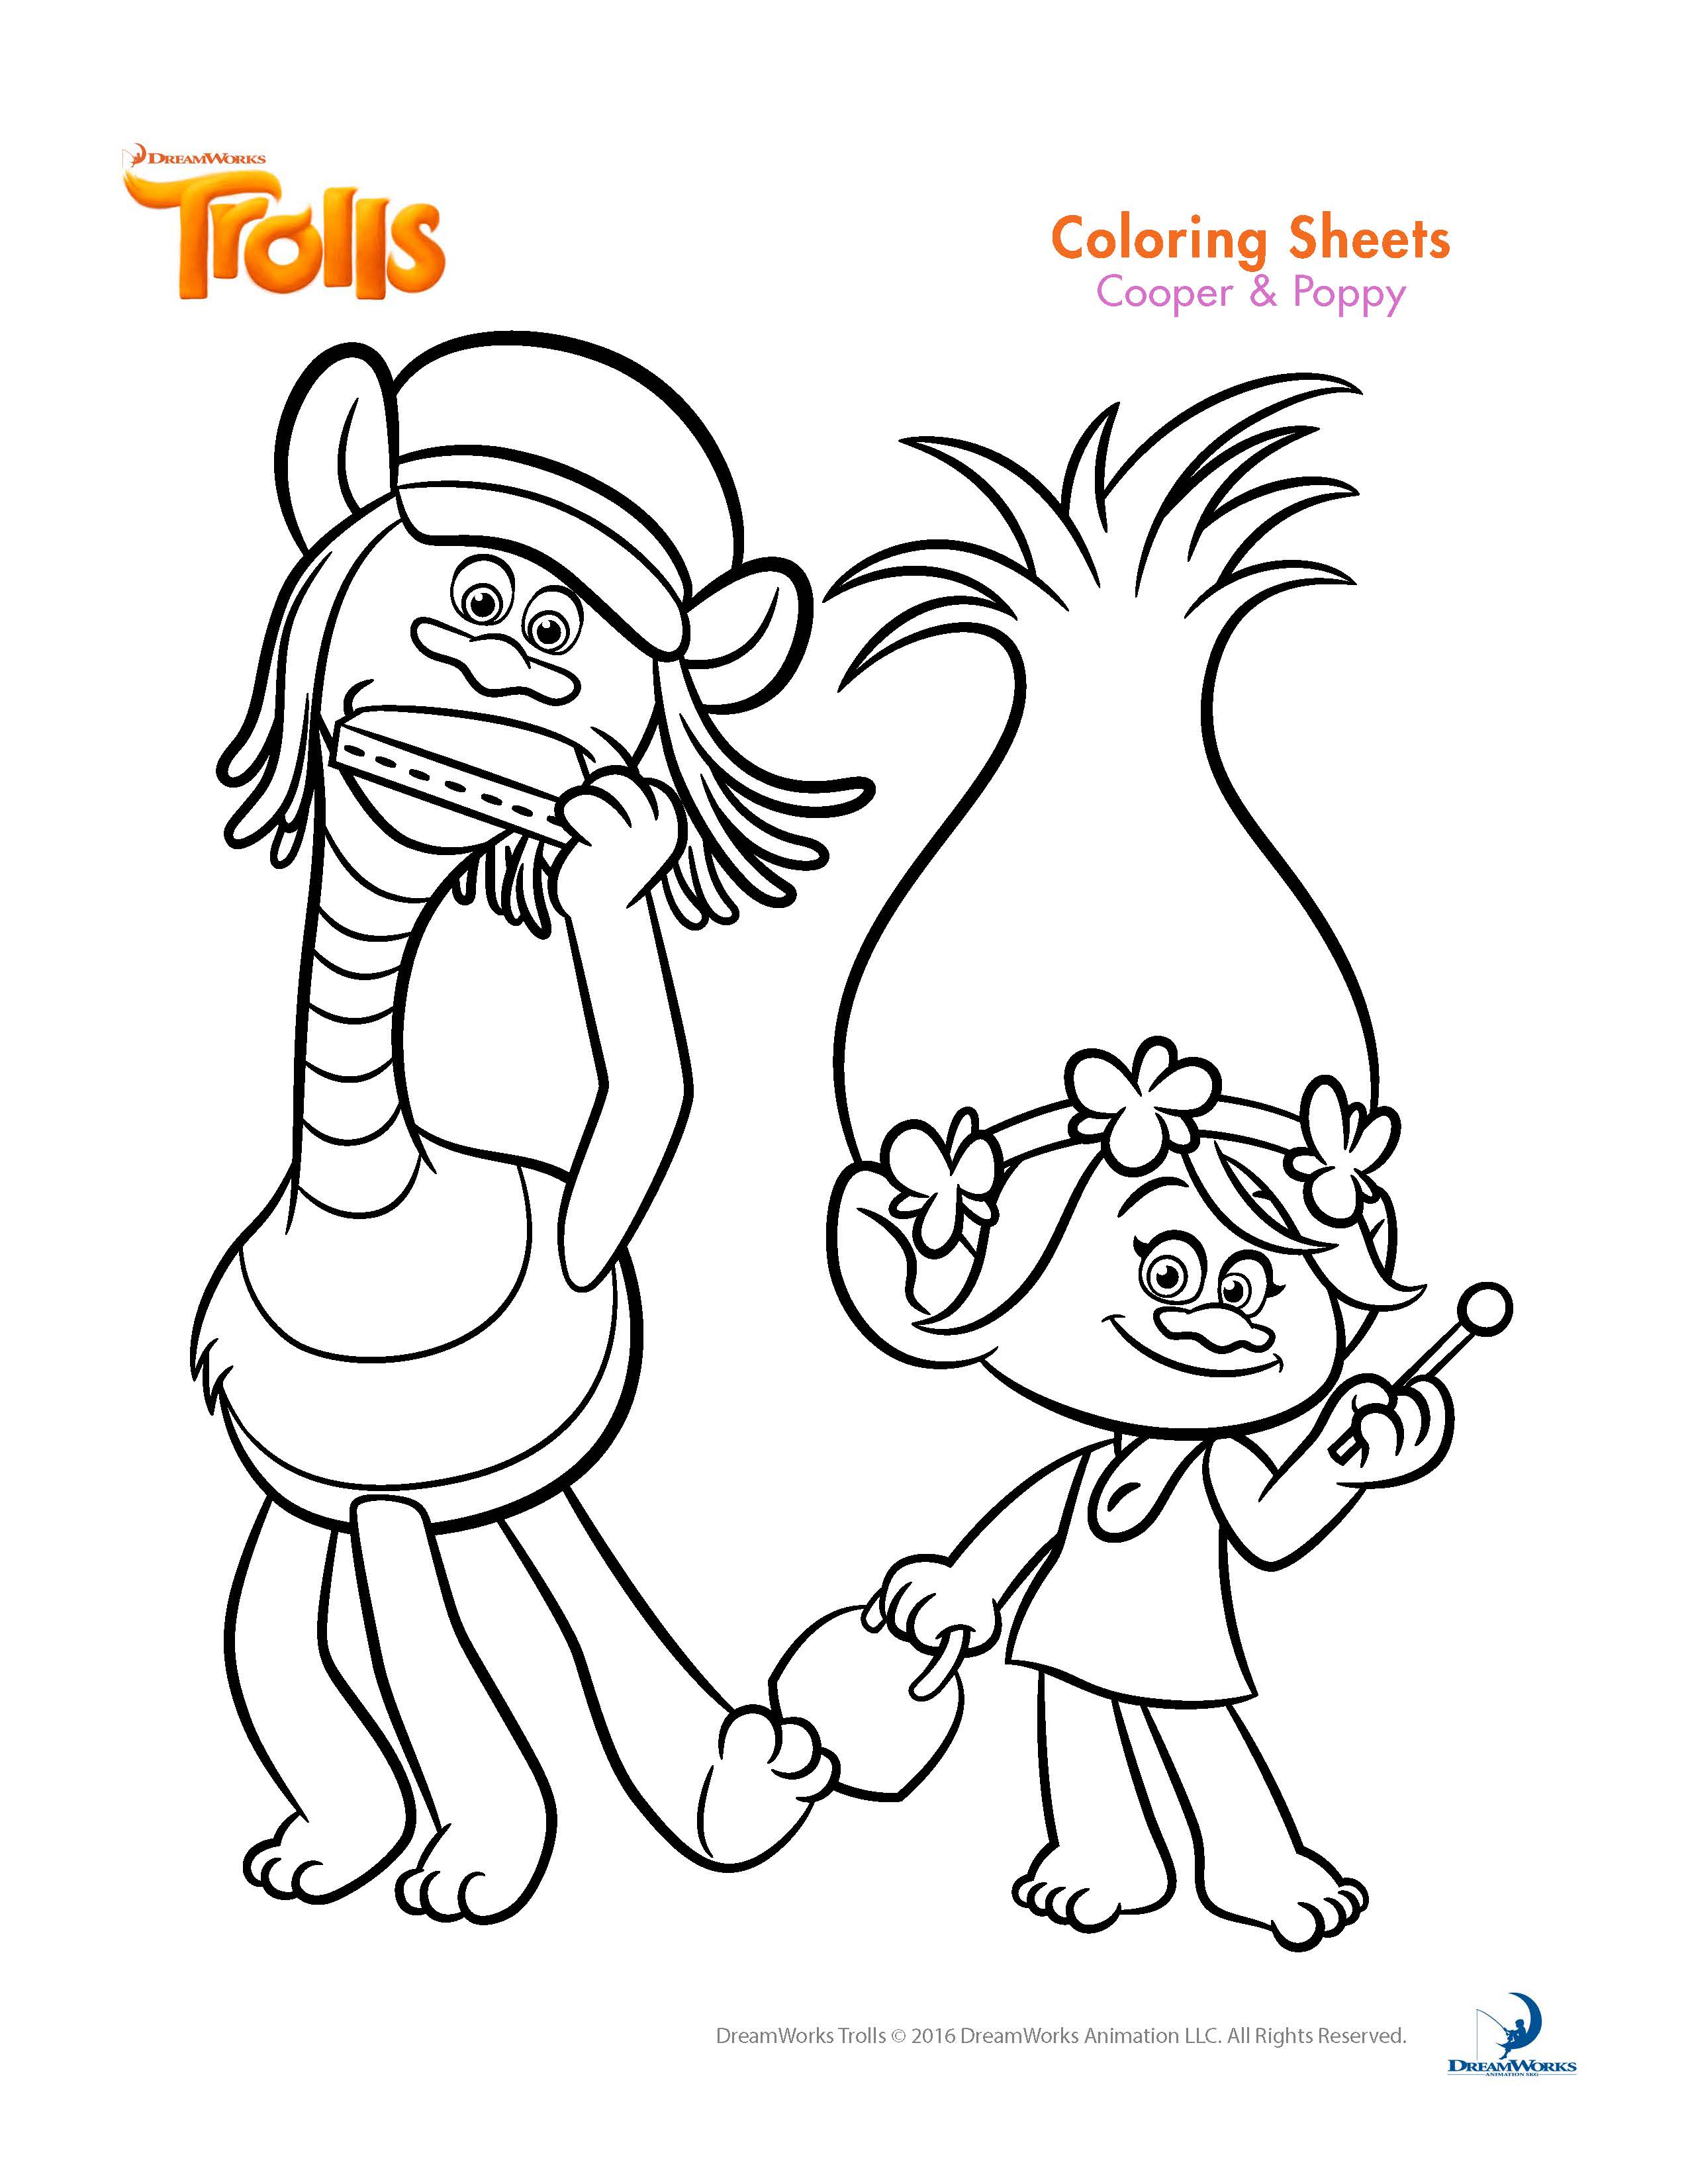 Trolls for children - Trolls Kids Coloring Pages